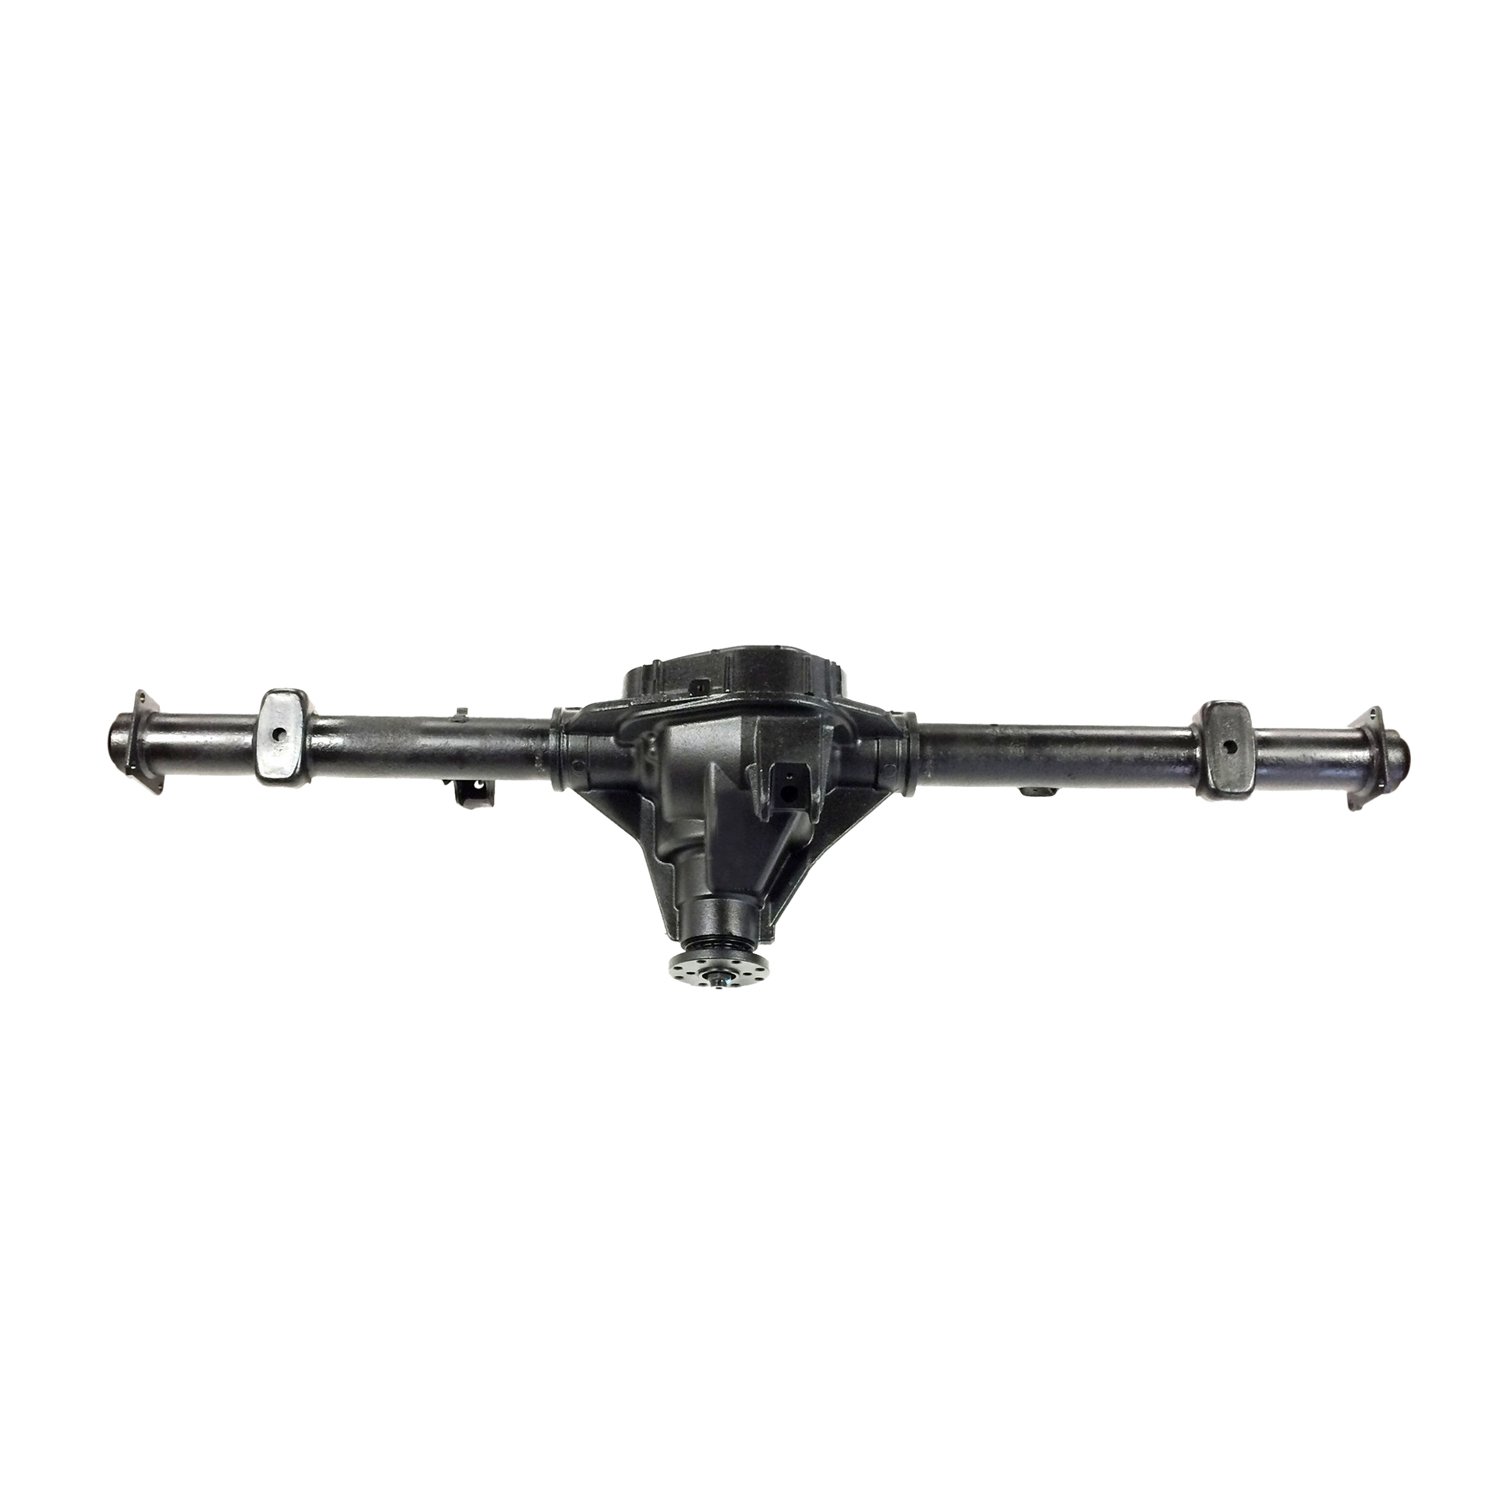 Remanufactured Complete Axle Assembly for 9.75" 09-11 F150 3.31, 6 Lug, Posi LSD